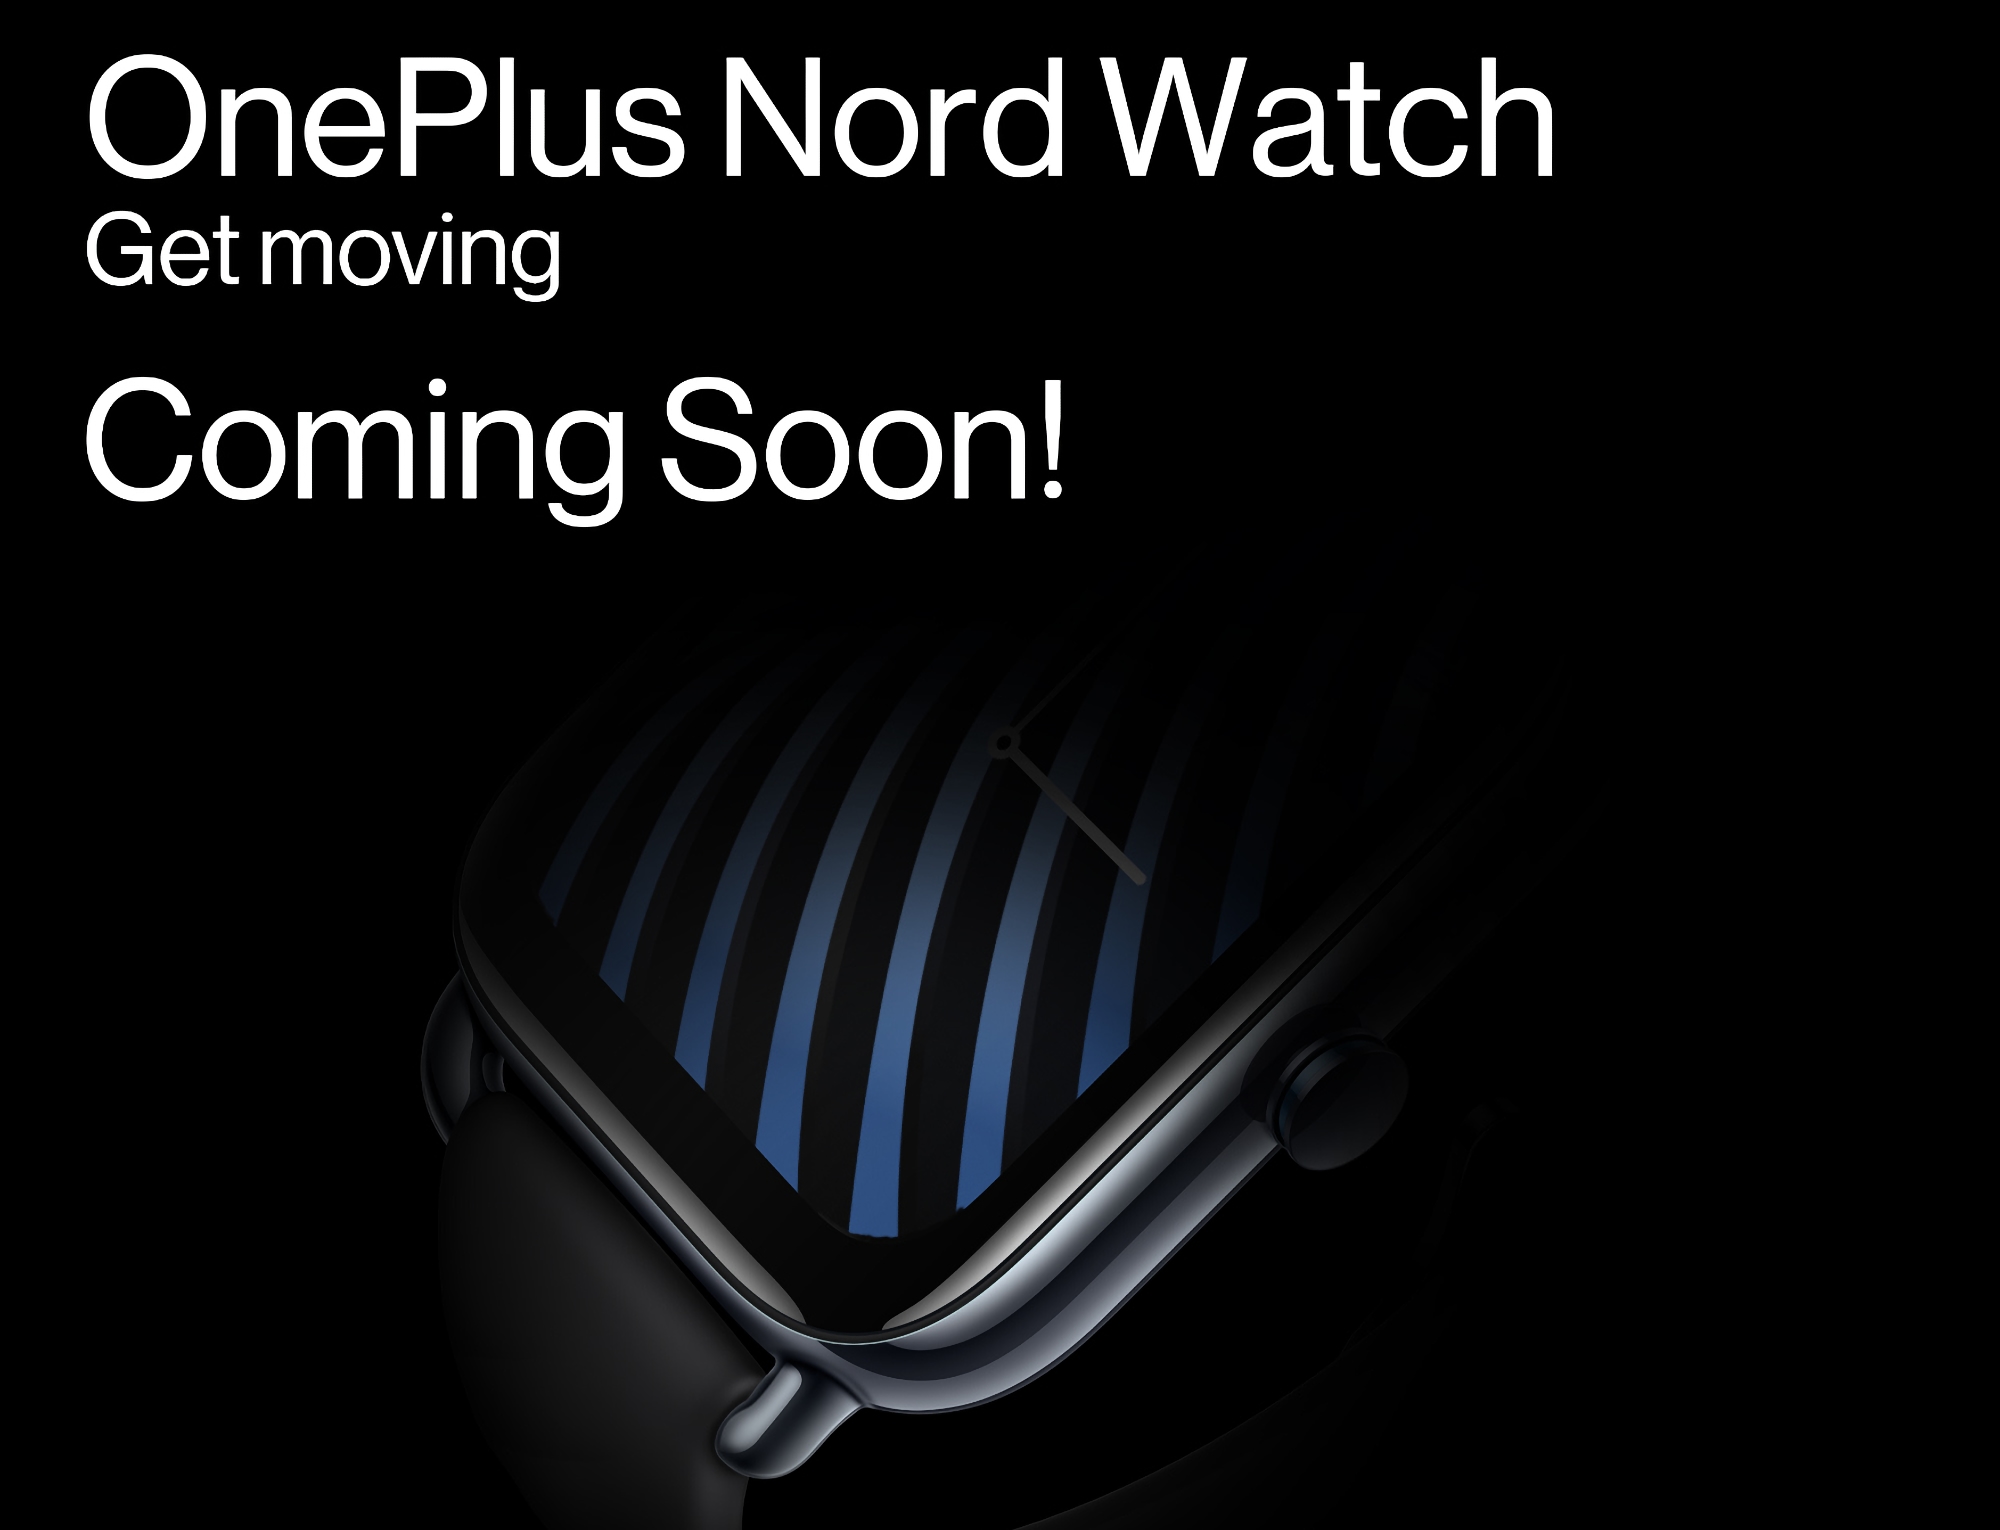 Announcement close: OnePlus started teasing the release of the Nord Watch smartwatch